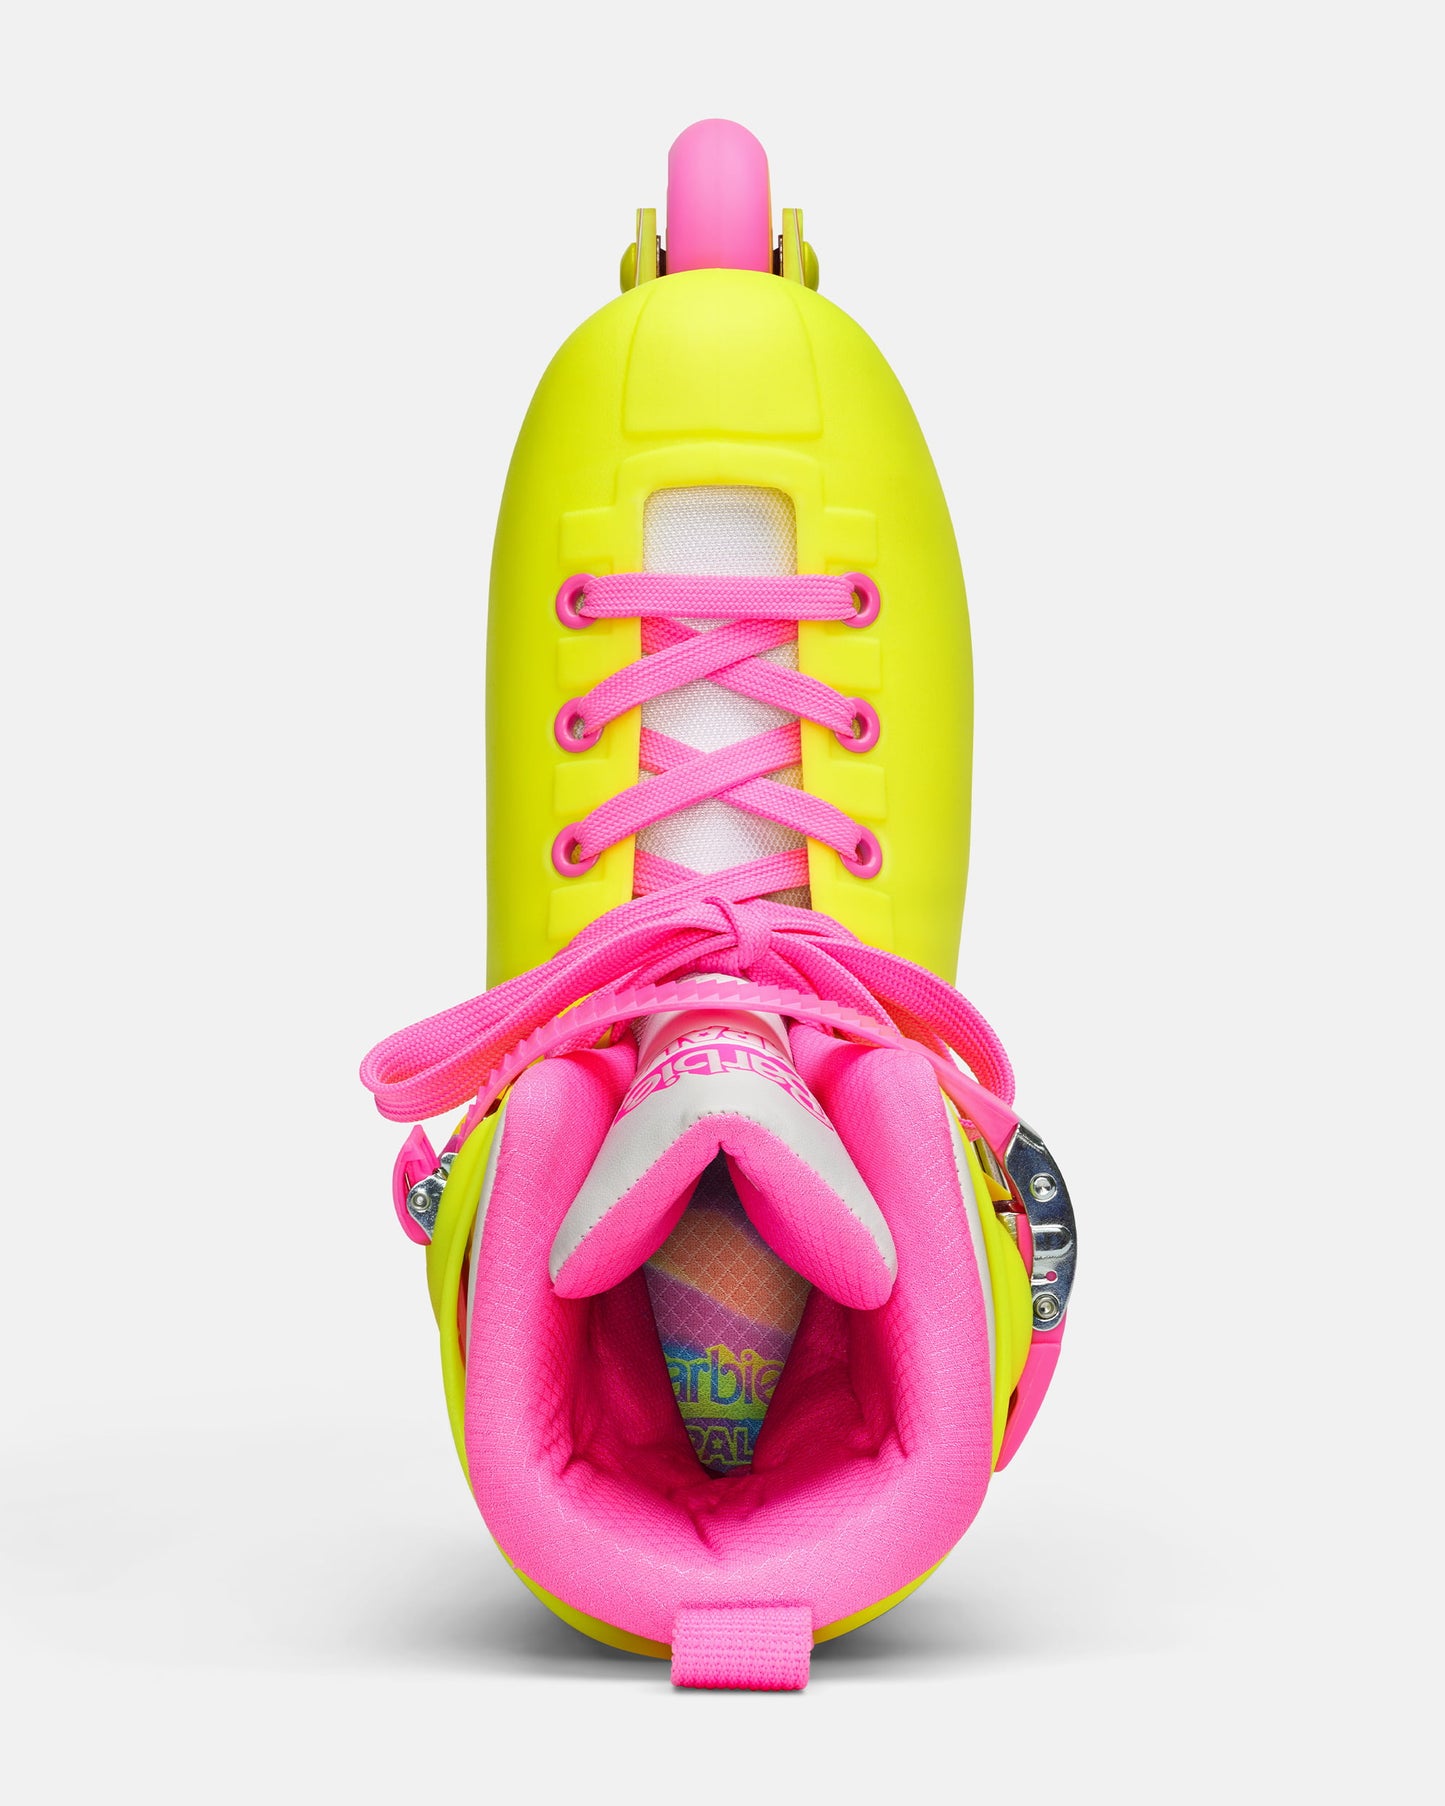 Aerial view of the Impala Lightspeed Inline Skate - Barbie Bright Yellow